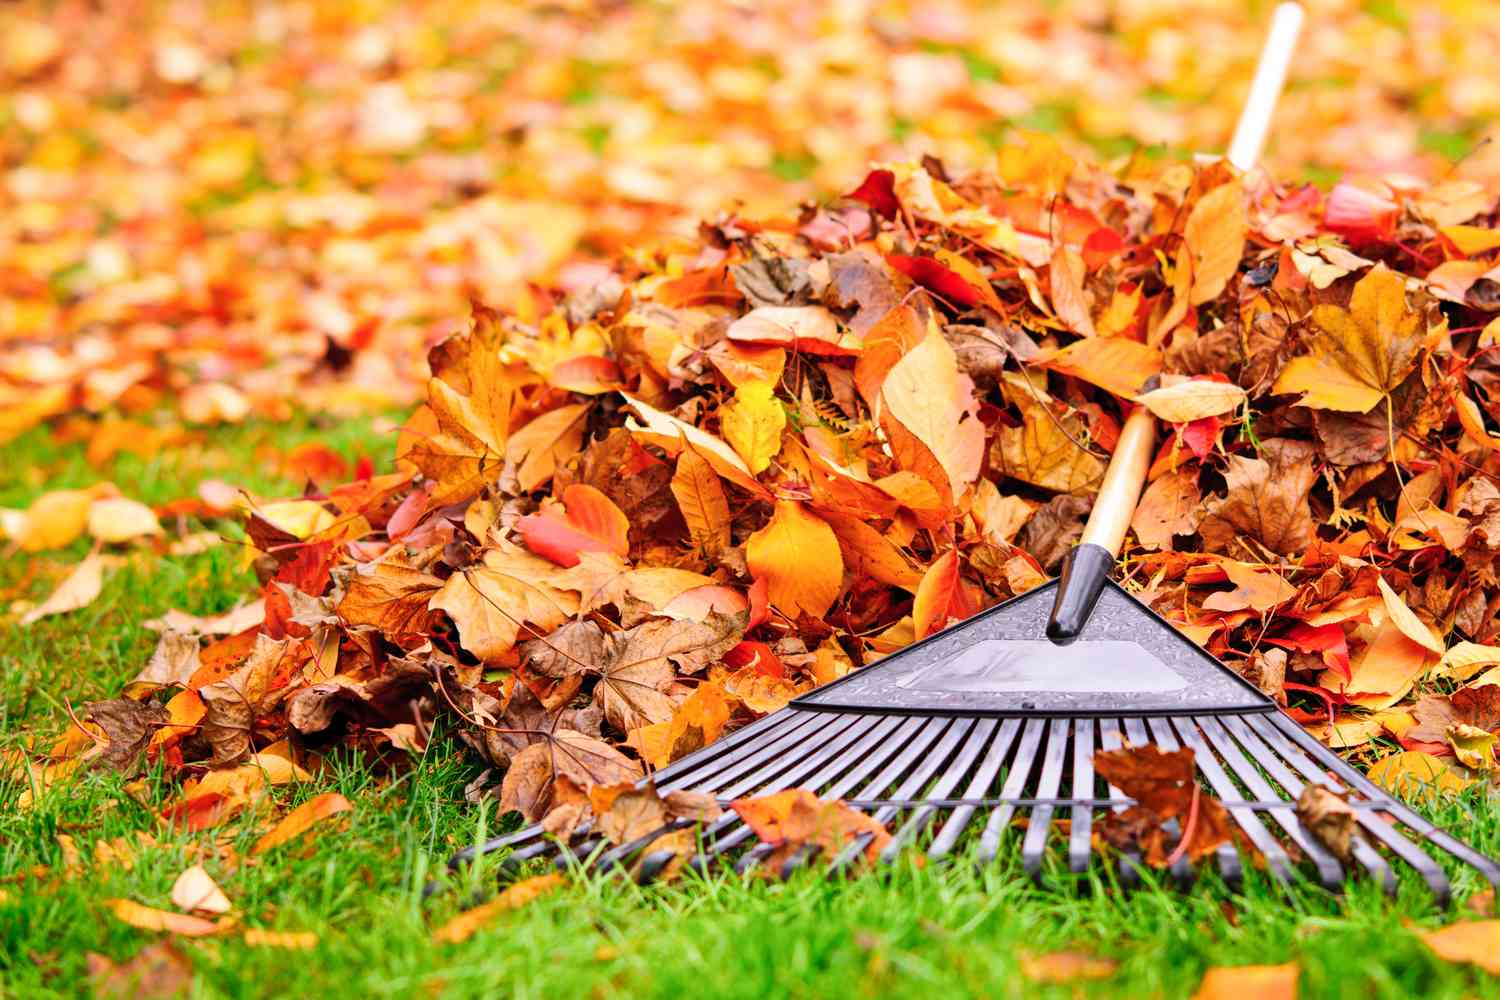 Rake and autumn leaves on grass.